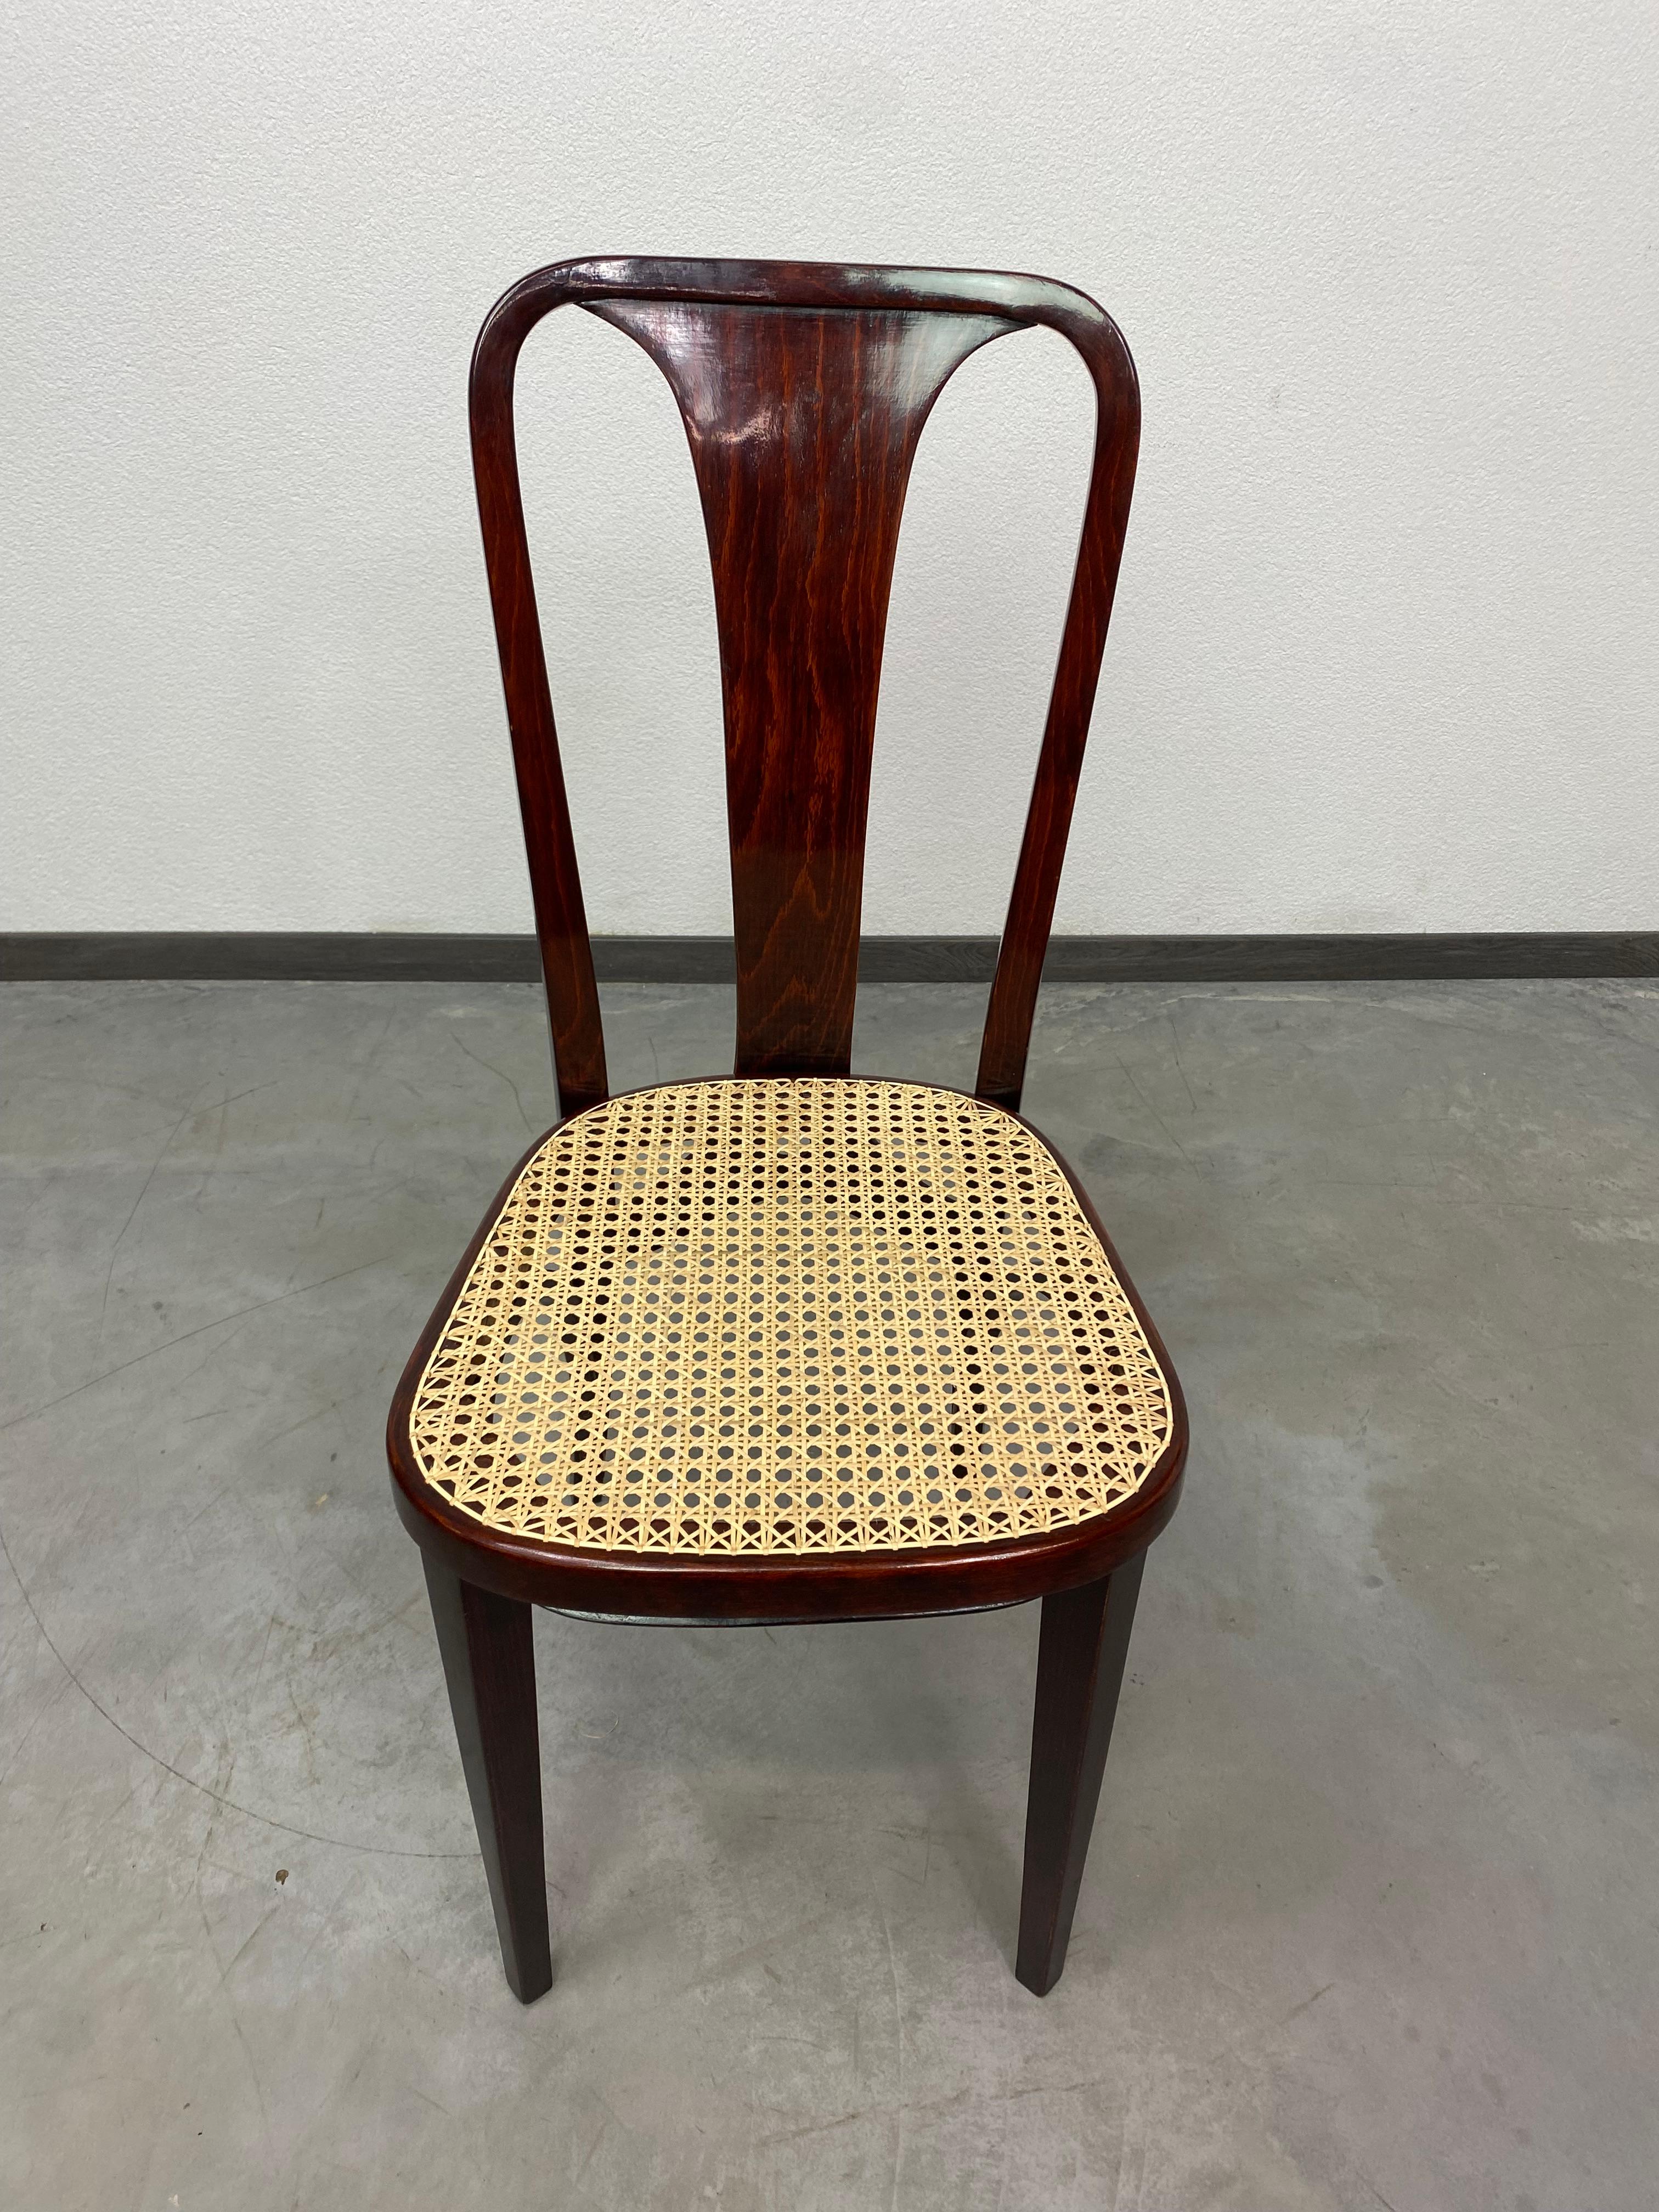 Secession dining room chair atr. Otto Prutscher for Thonet professionally stained and repolished.